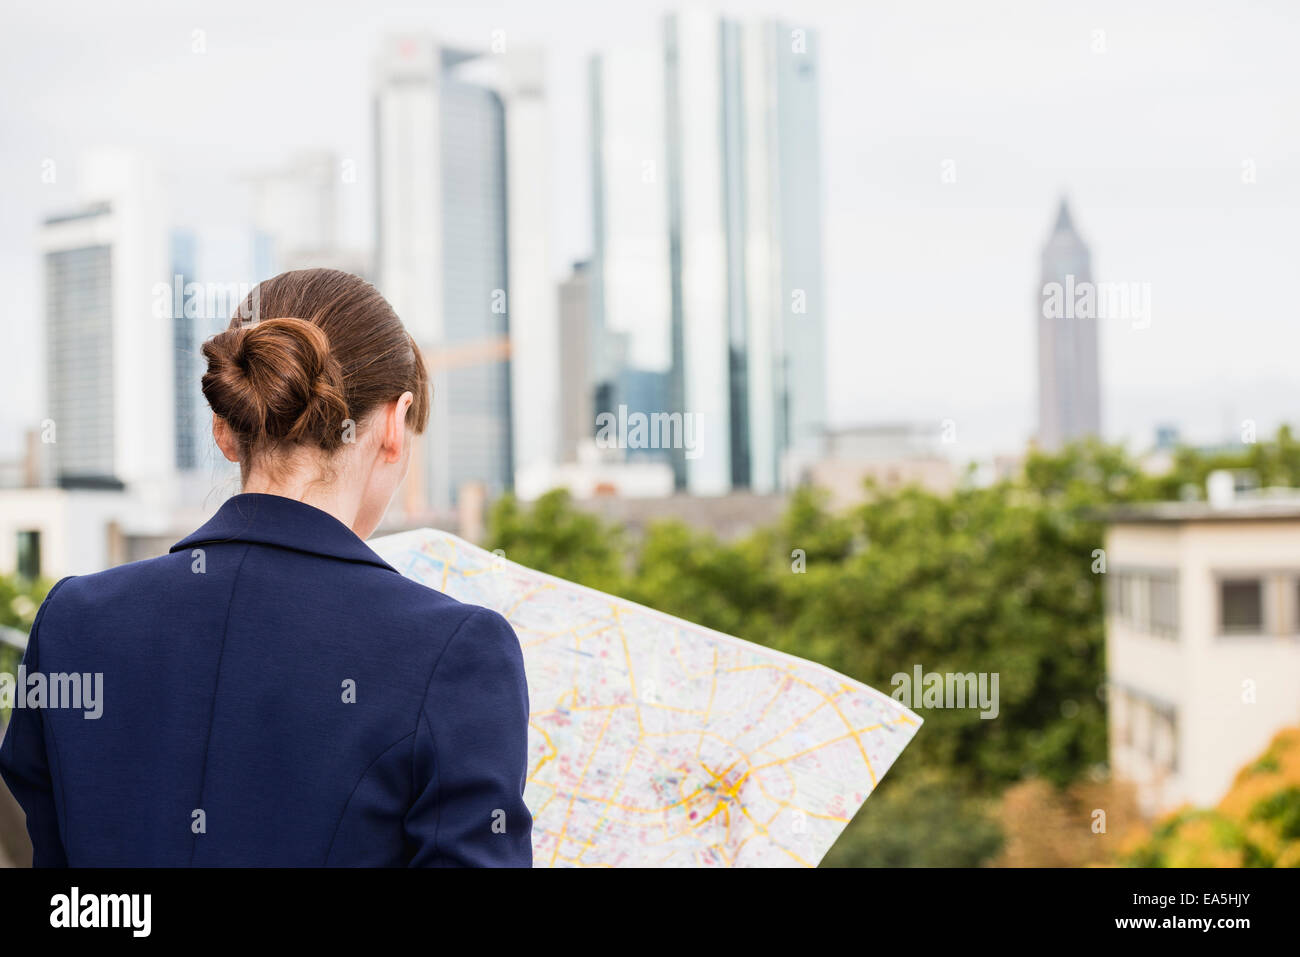 Germany, Hesse, Frankfurt, woman looking at city map, back view Stock Photo